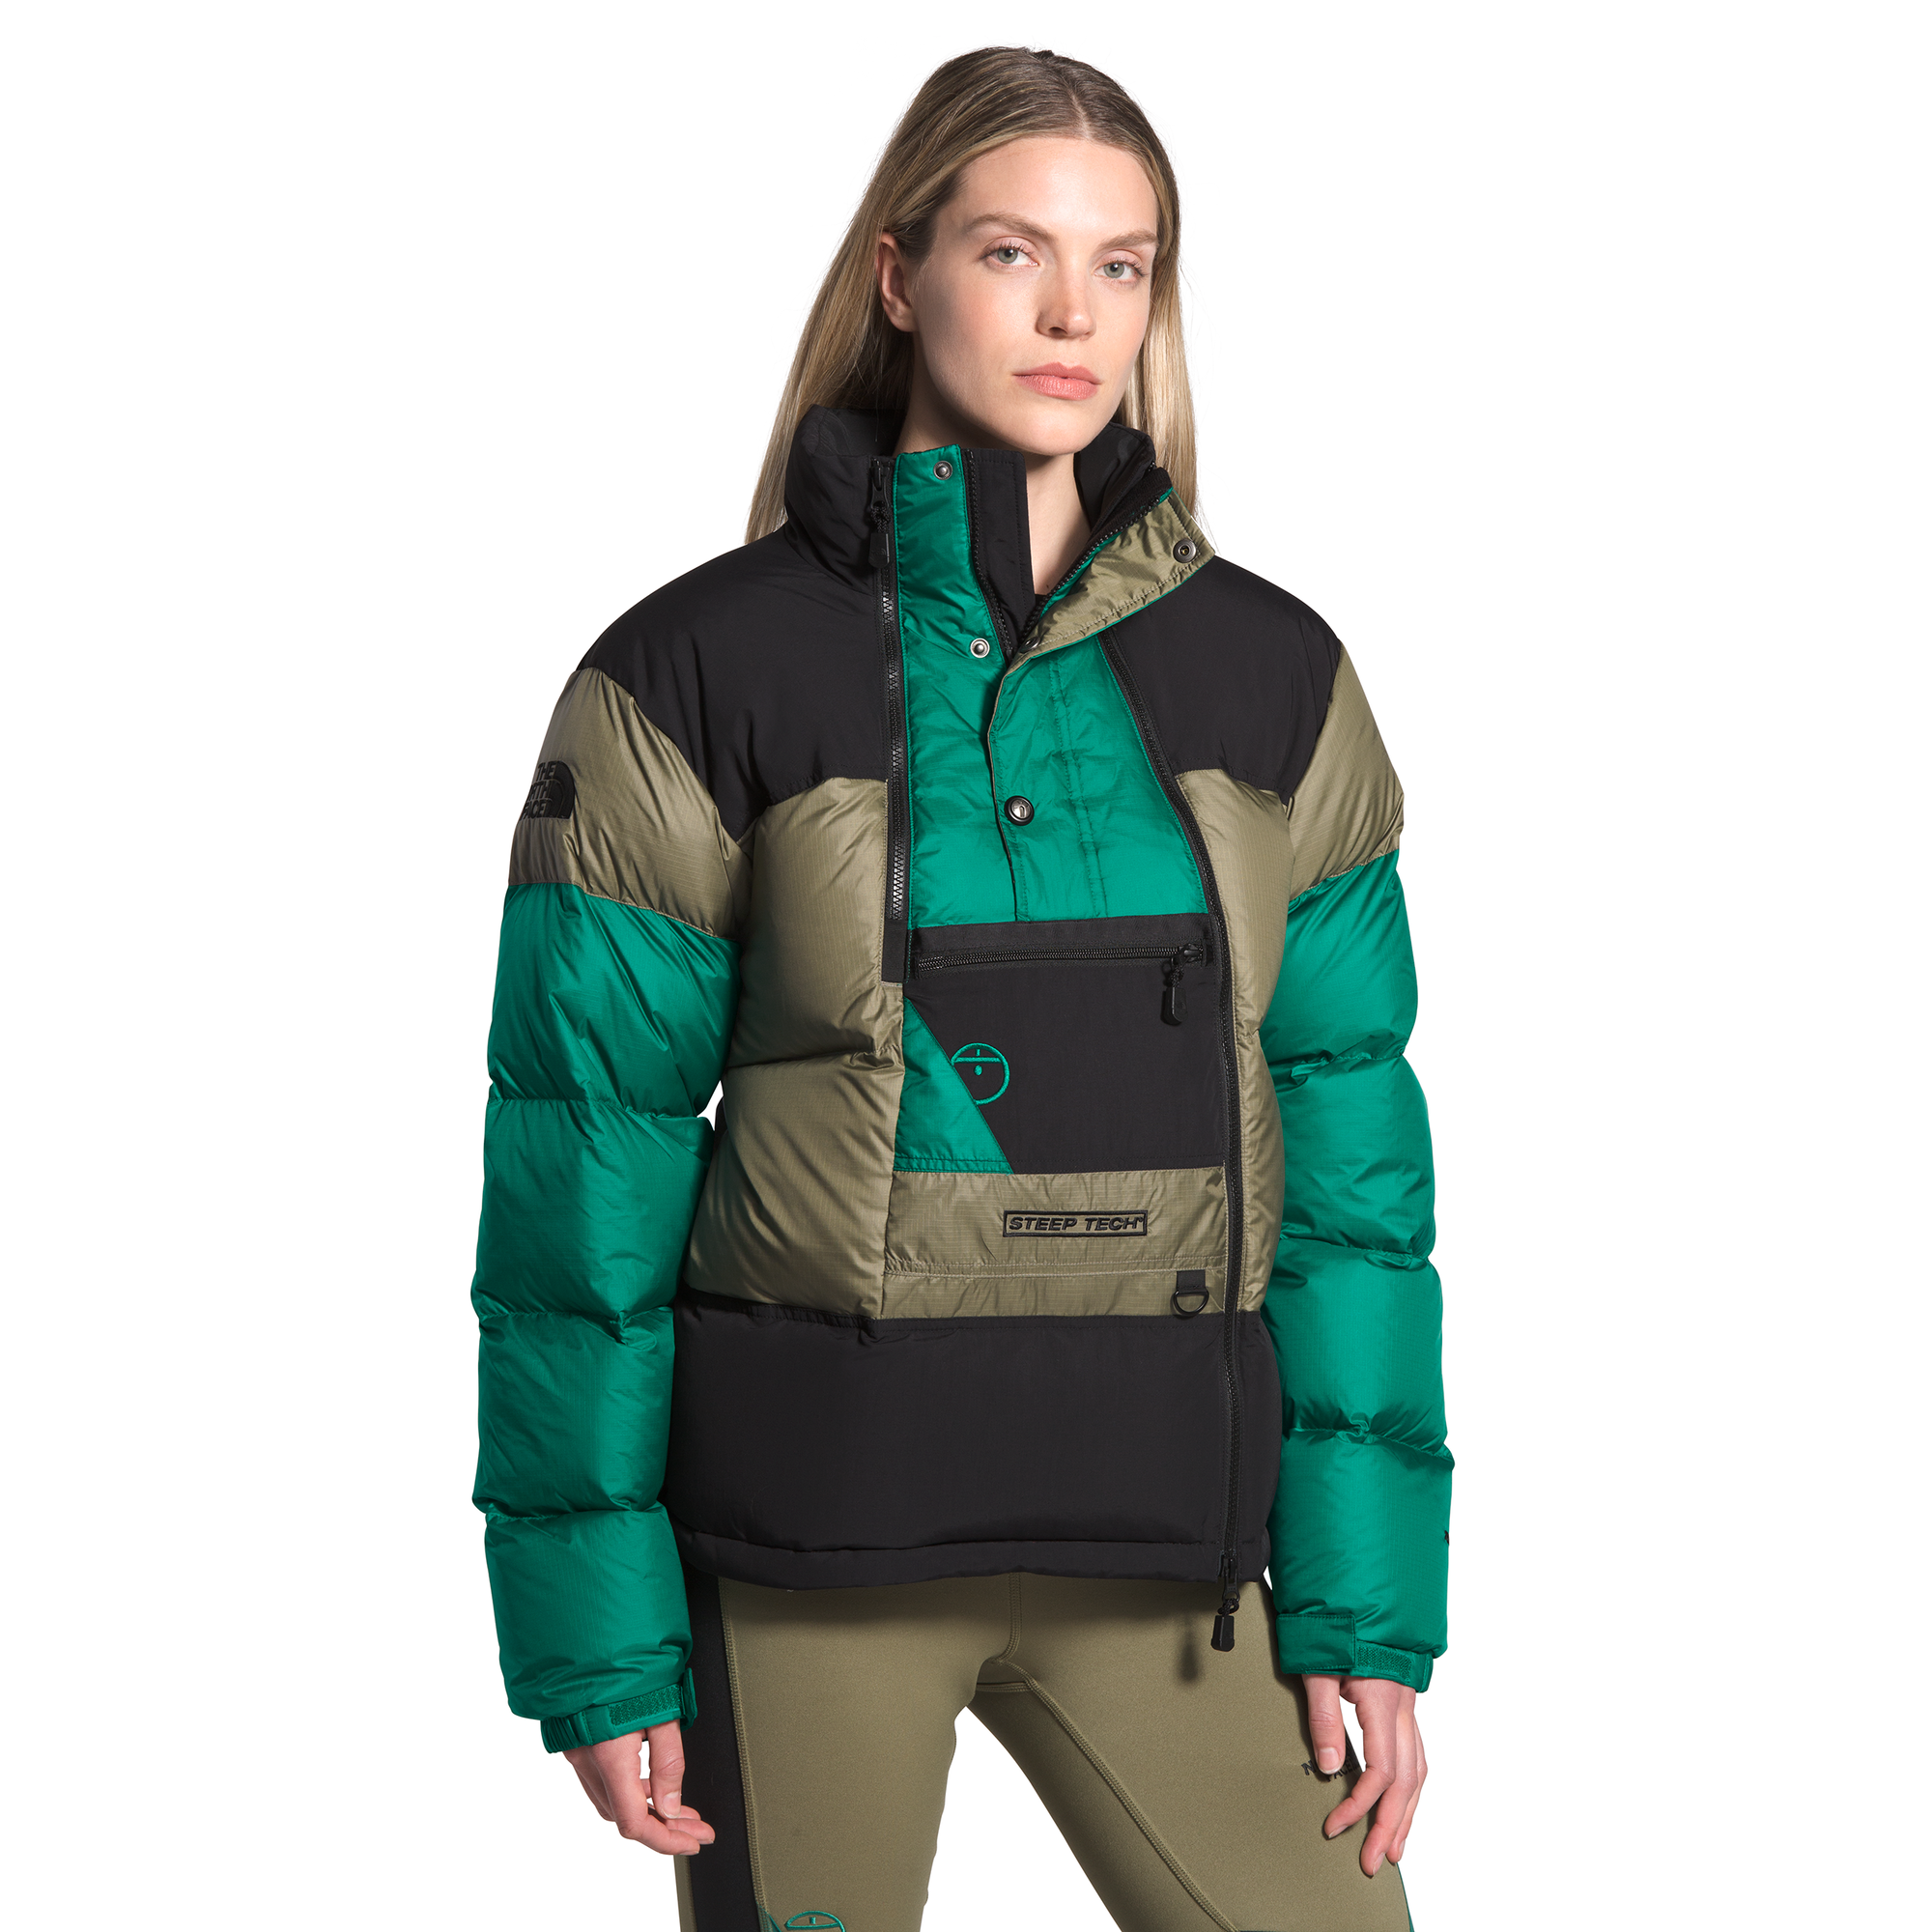 The North Face Steep Tech Down Jacket - Nf0a4qytsh31 - Sneakersnstuff (SNS)